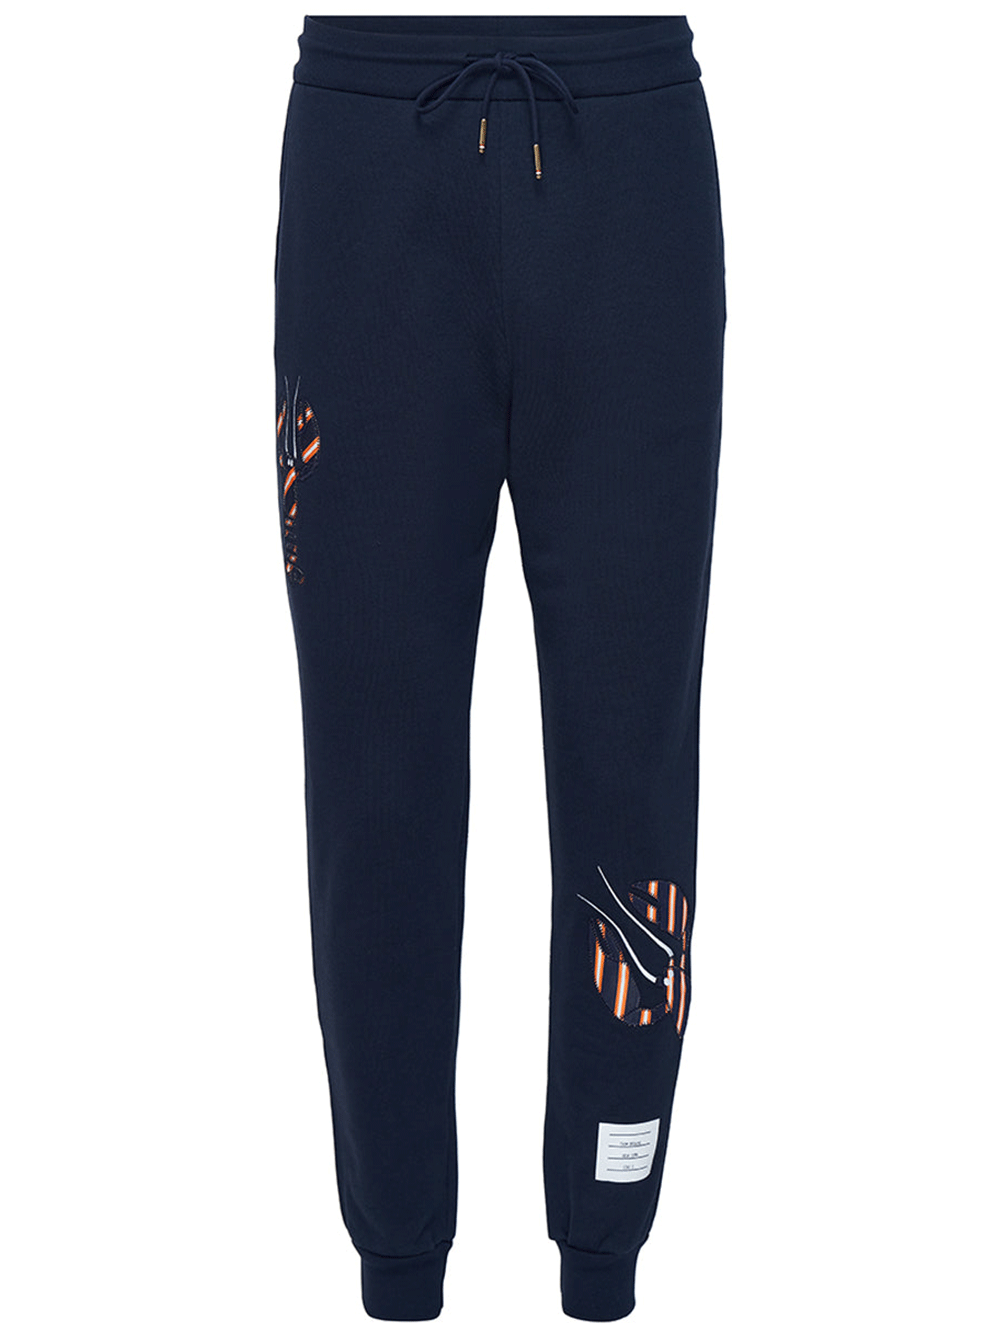 Thom-Browne-Lobster-Applique-Embroidery-Sweatpants-Navy-1